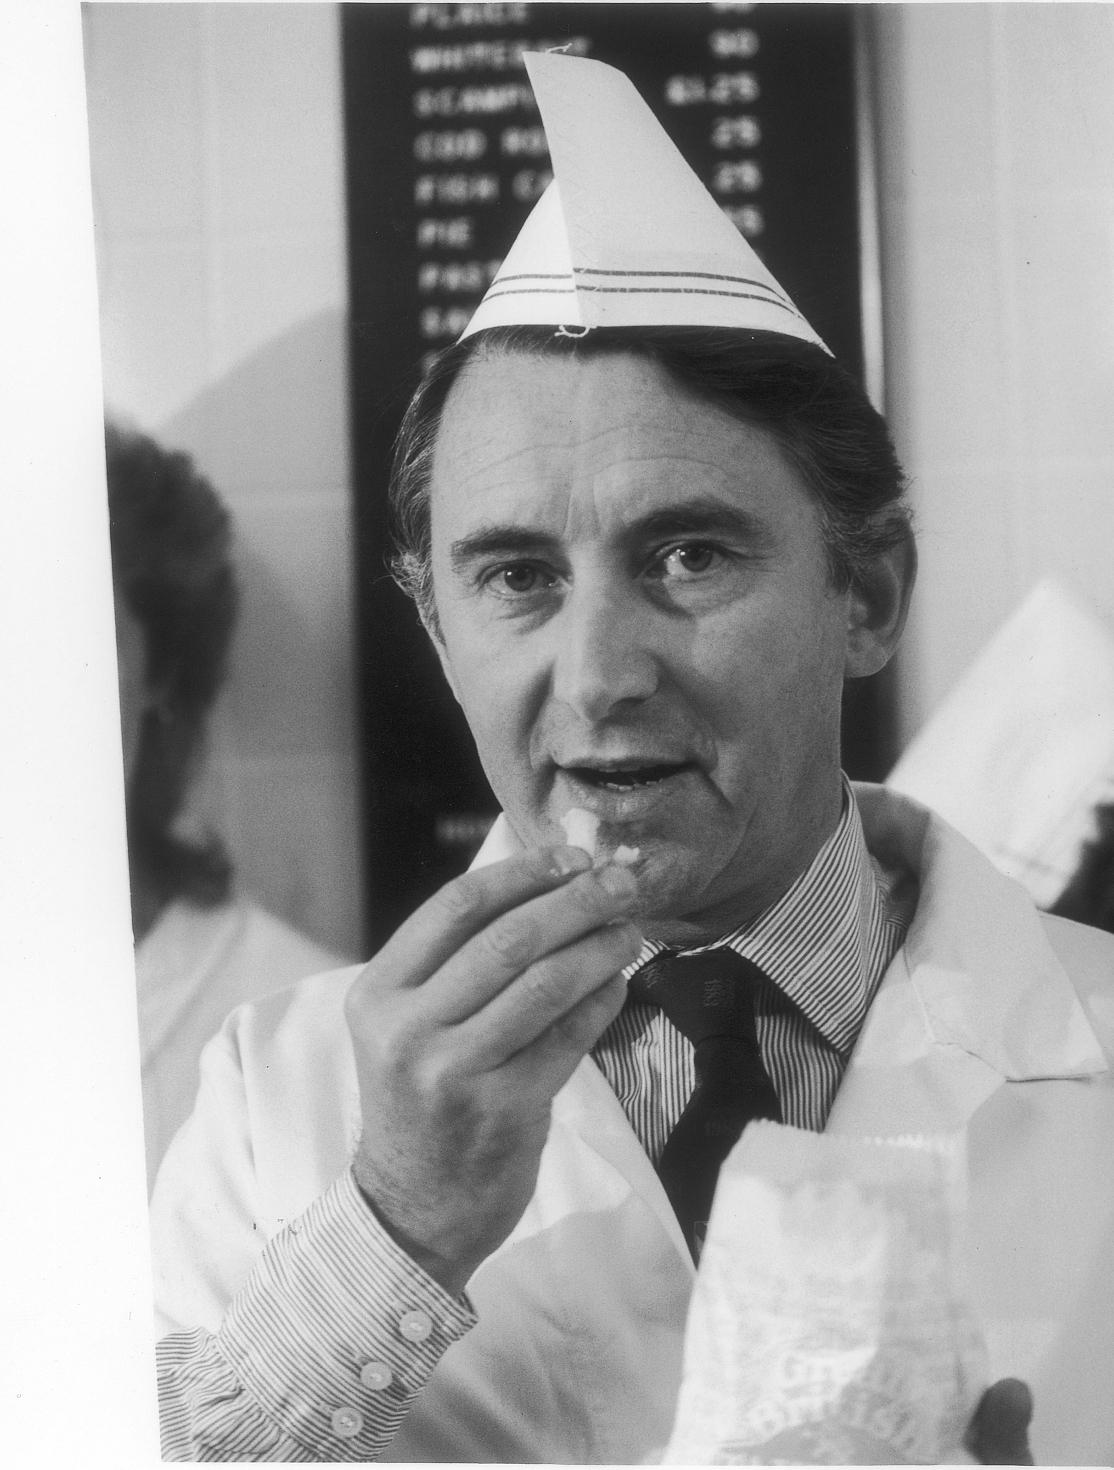 David Steel, liberal leader dons white cap  and overalls  when he visited Tony Watt's fish bar Old Christchurch Road, Bmth, to discuss VAT charges, 1984